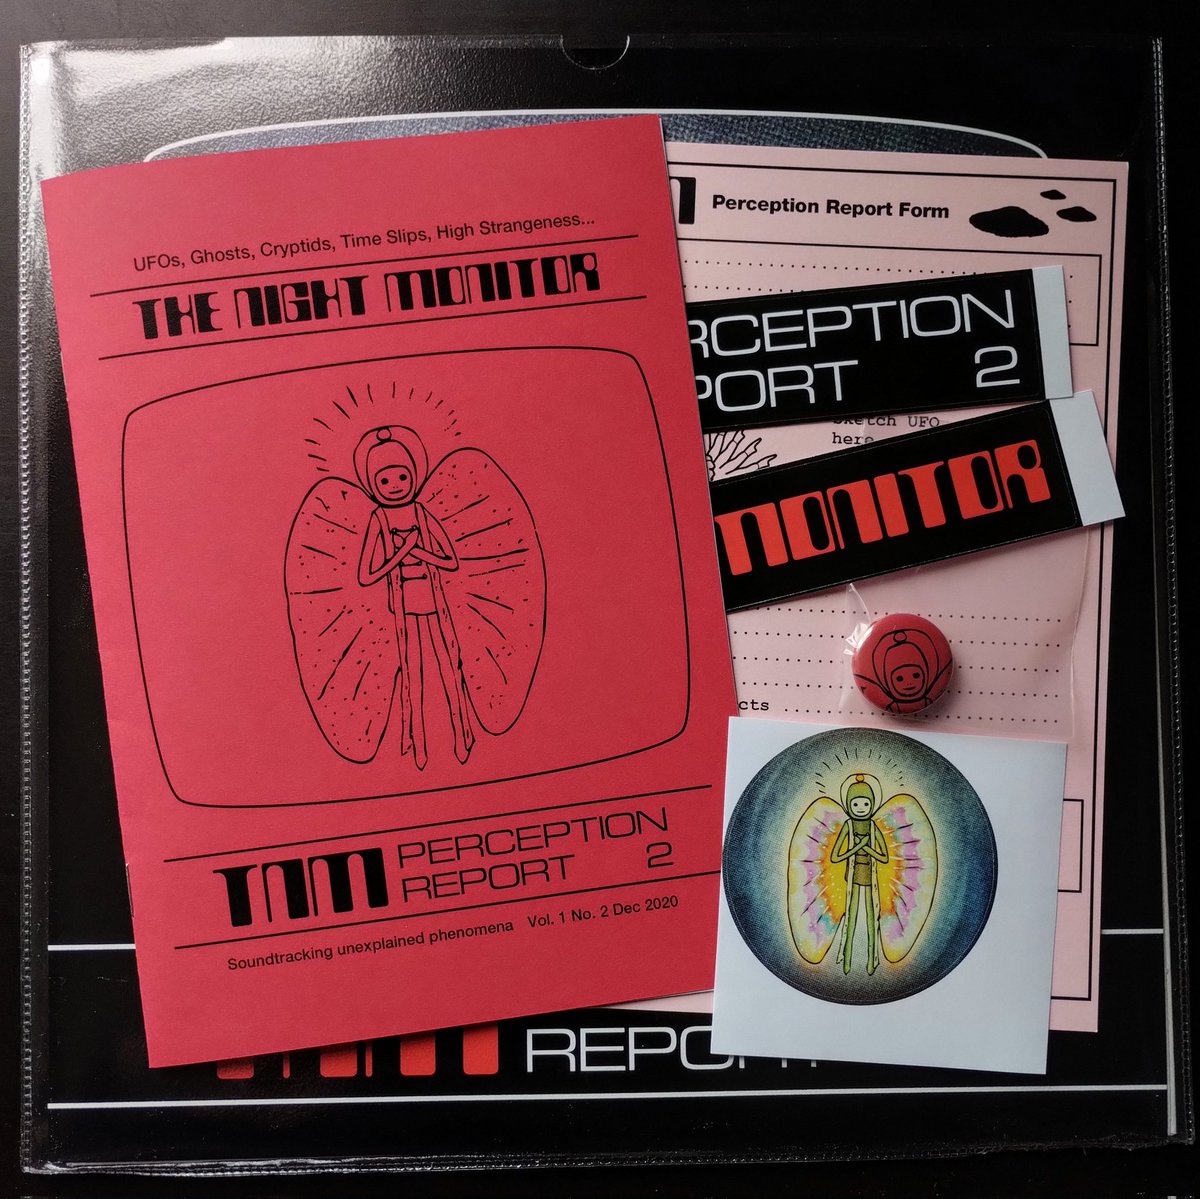 Perception Report 2 (dedicated to Jean Hingley's 'mince pie martians' experience) 10' lathe cut comes with a zine, report form, 3 stickers and a badge. Only 8 copies remaining 👽 thenightmonitor.bandcamp.com/album/percepti…